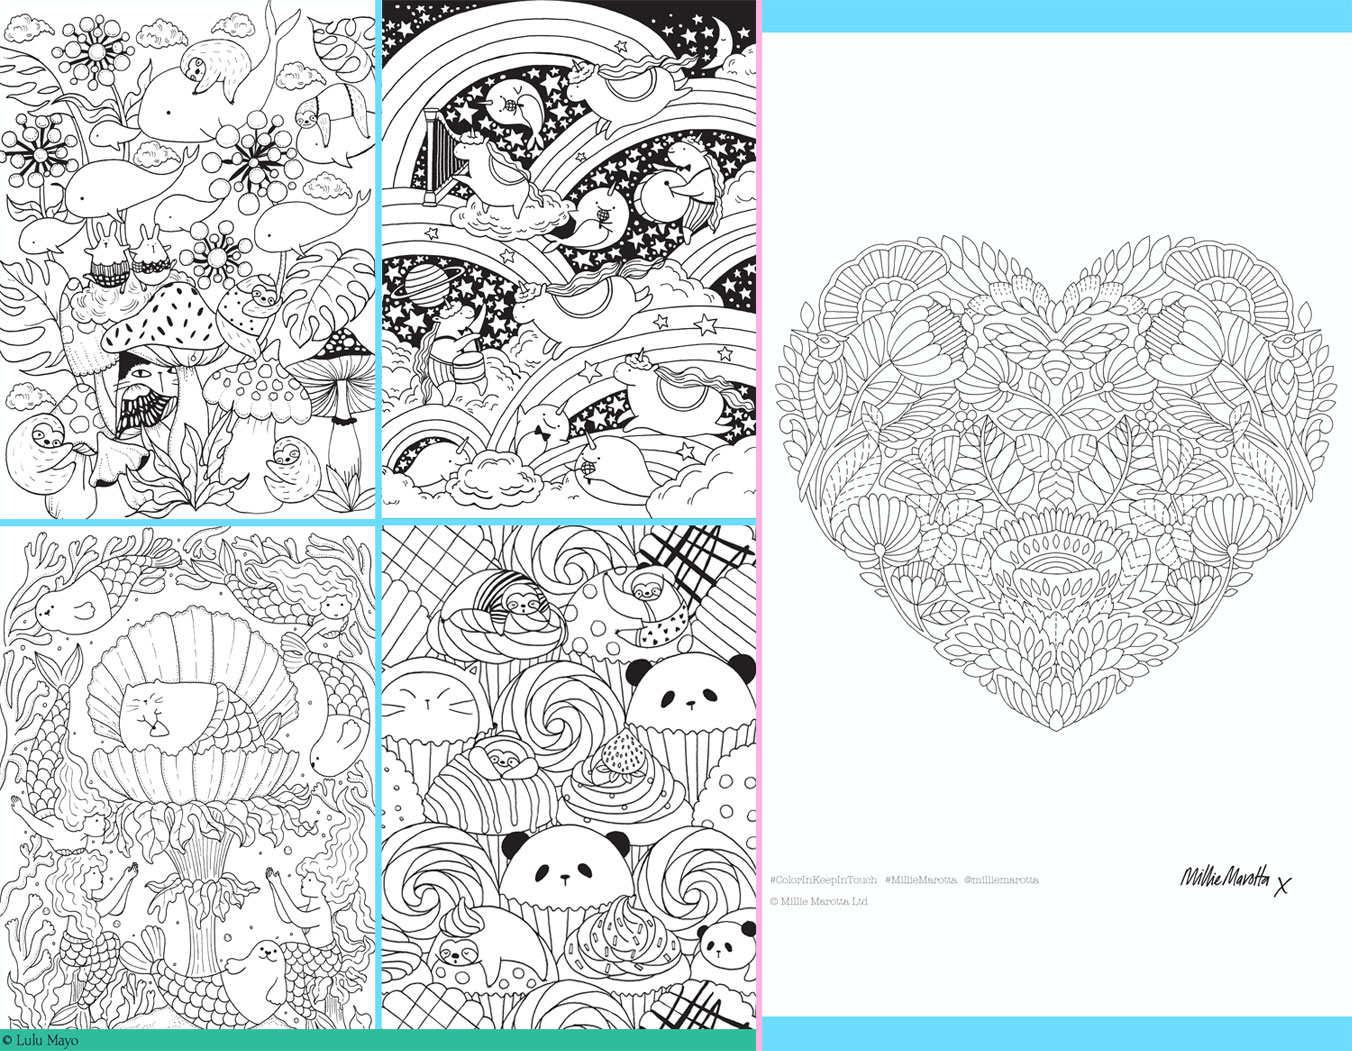 Take A Break With These Adorable Free Coloring Sheets | The SparkNotes Blog